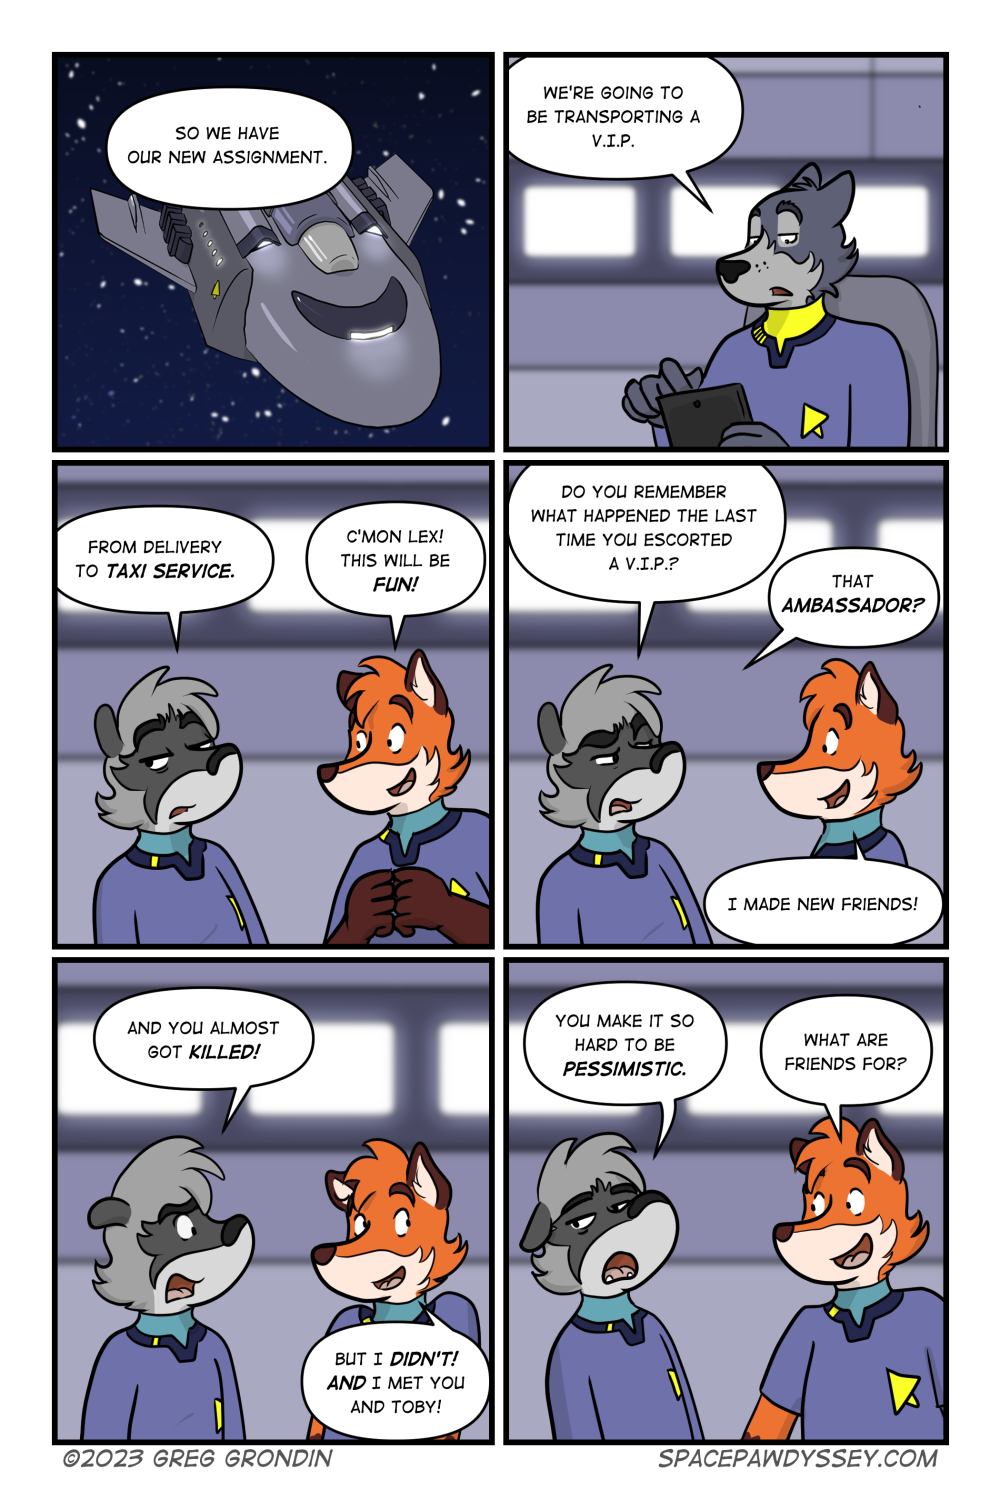 Space Pawdyssey #646